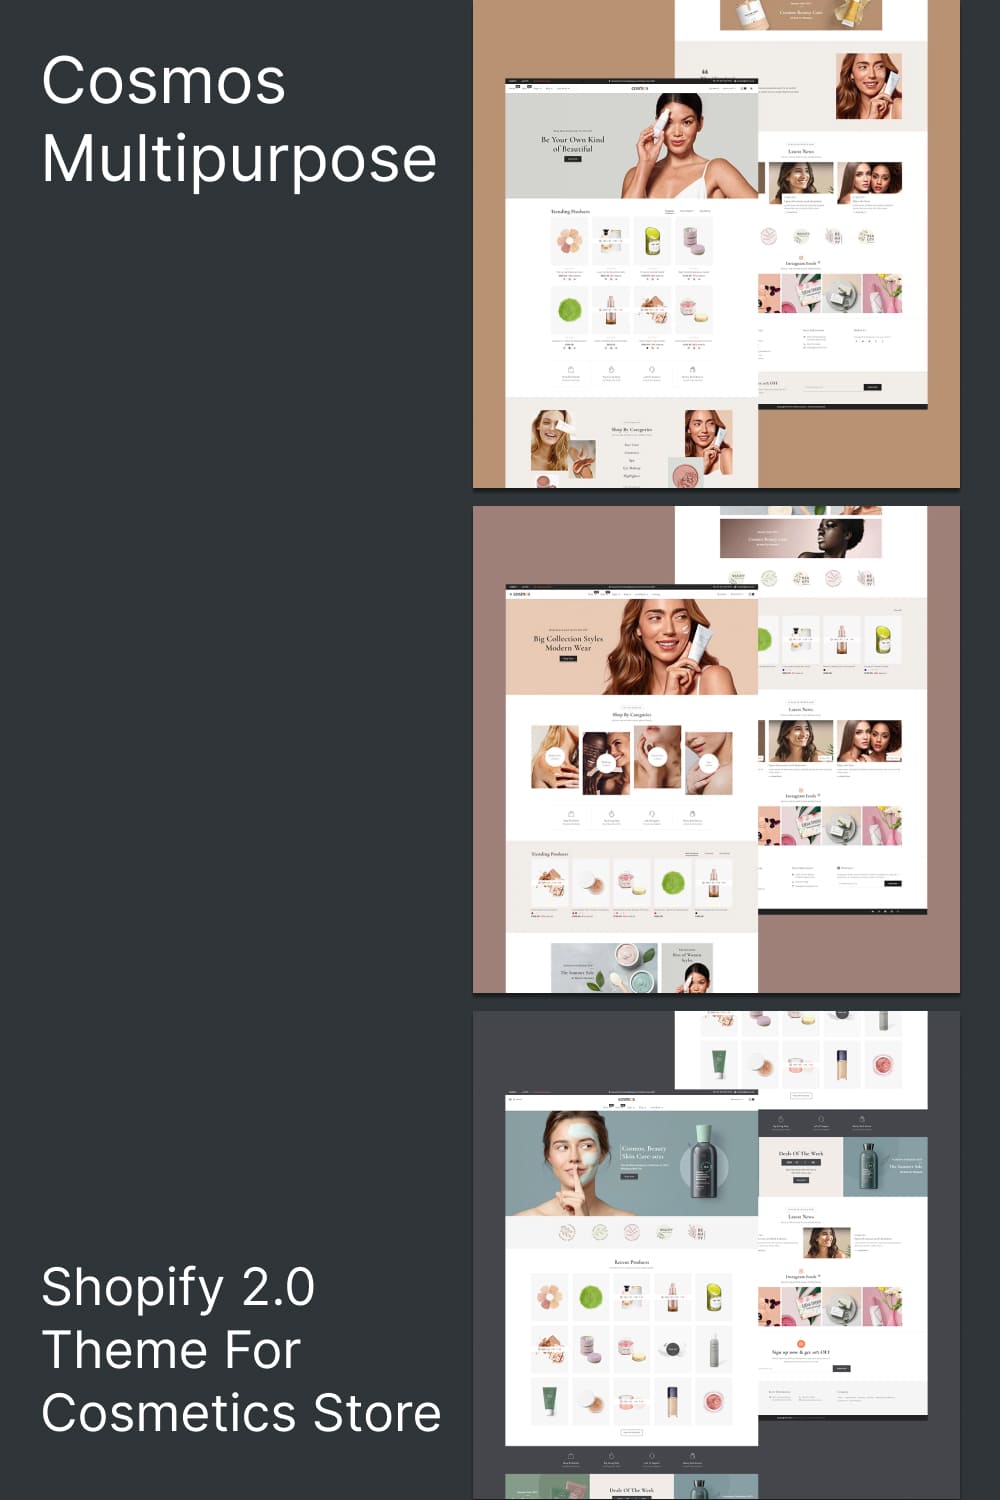 Cosmos Multipurpose Shopify 2.0 Theme For Cosmetics Store - Pinterest.